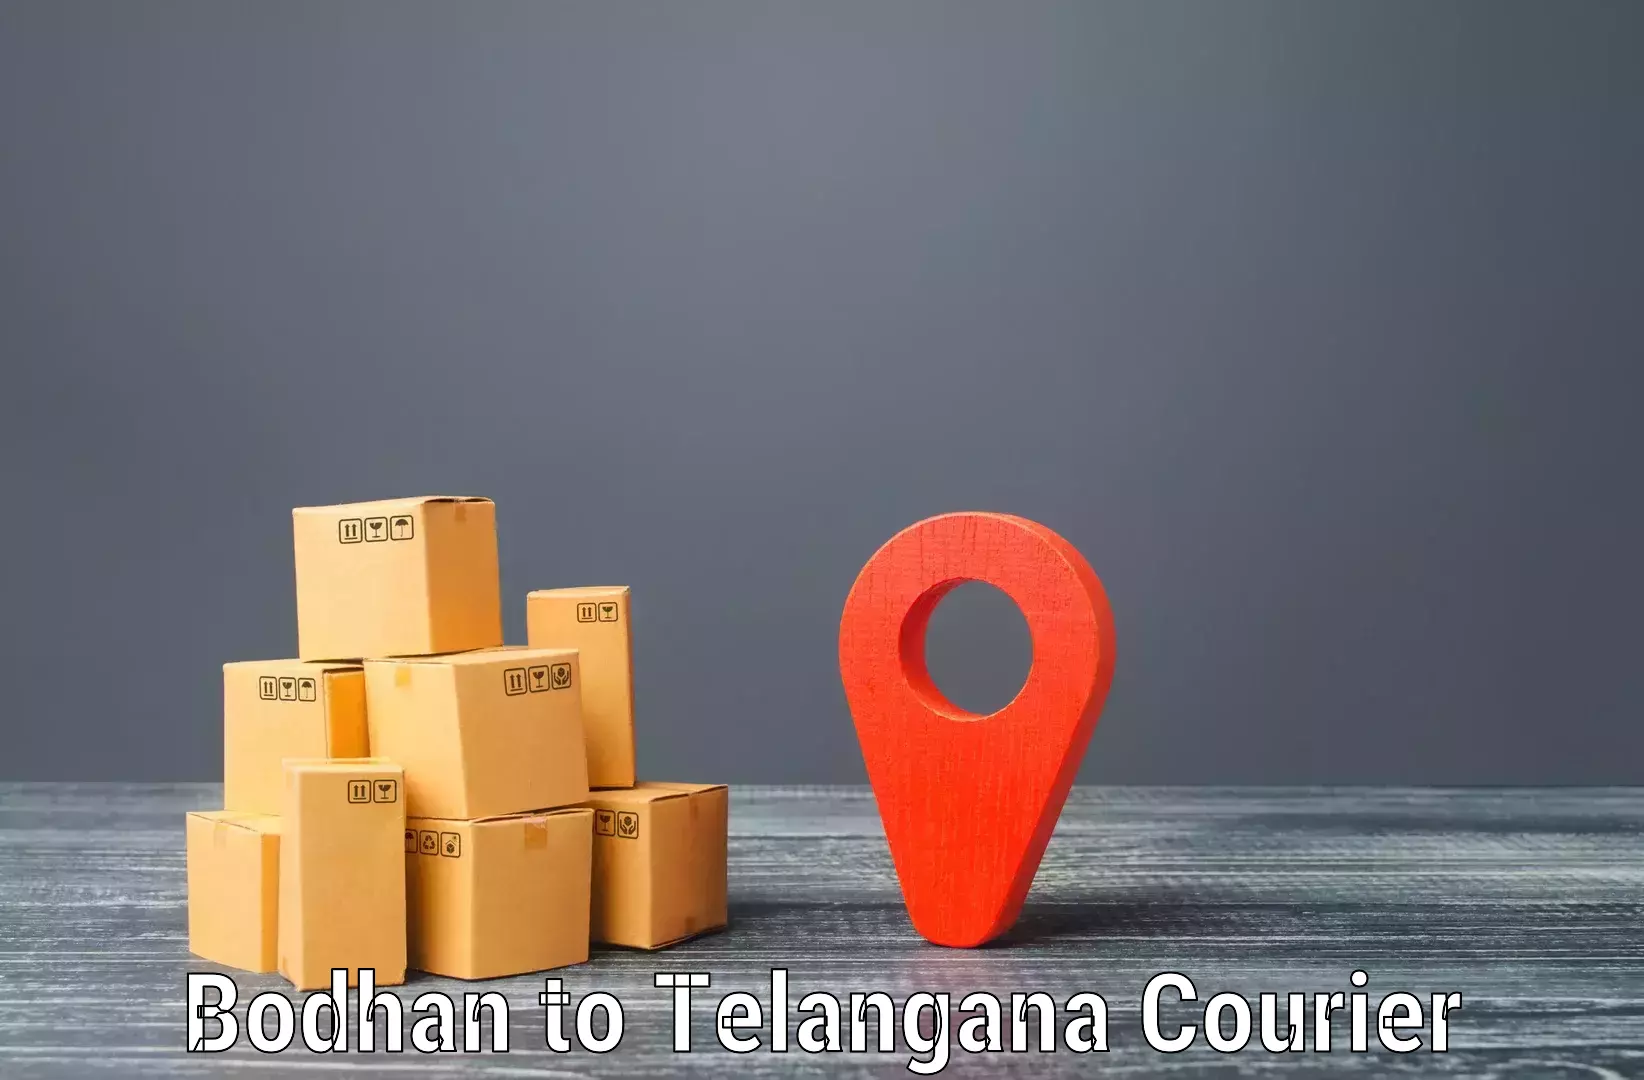 Courier service comparison in Bodhan to Trimulgherry